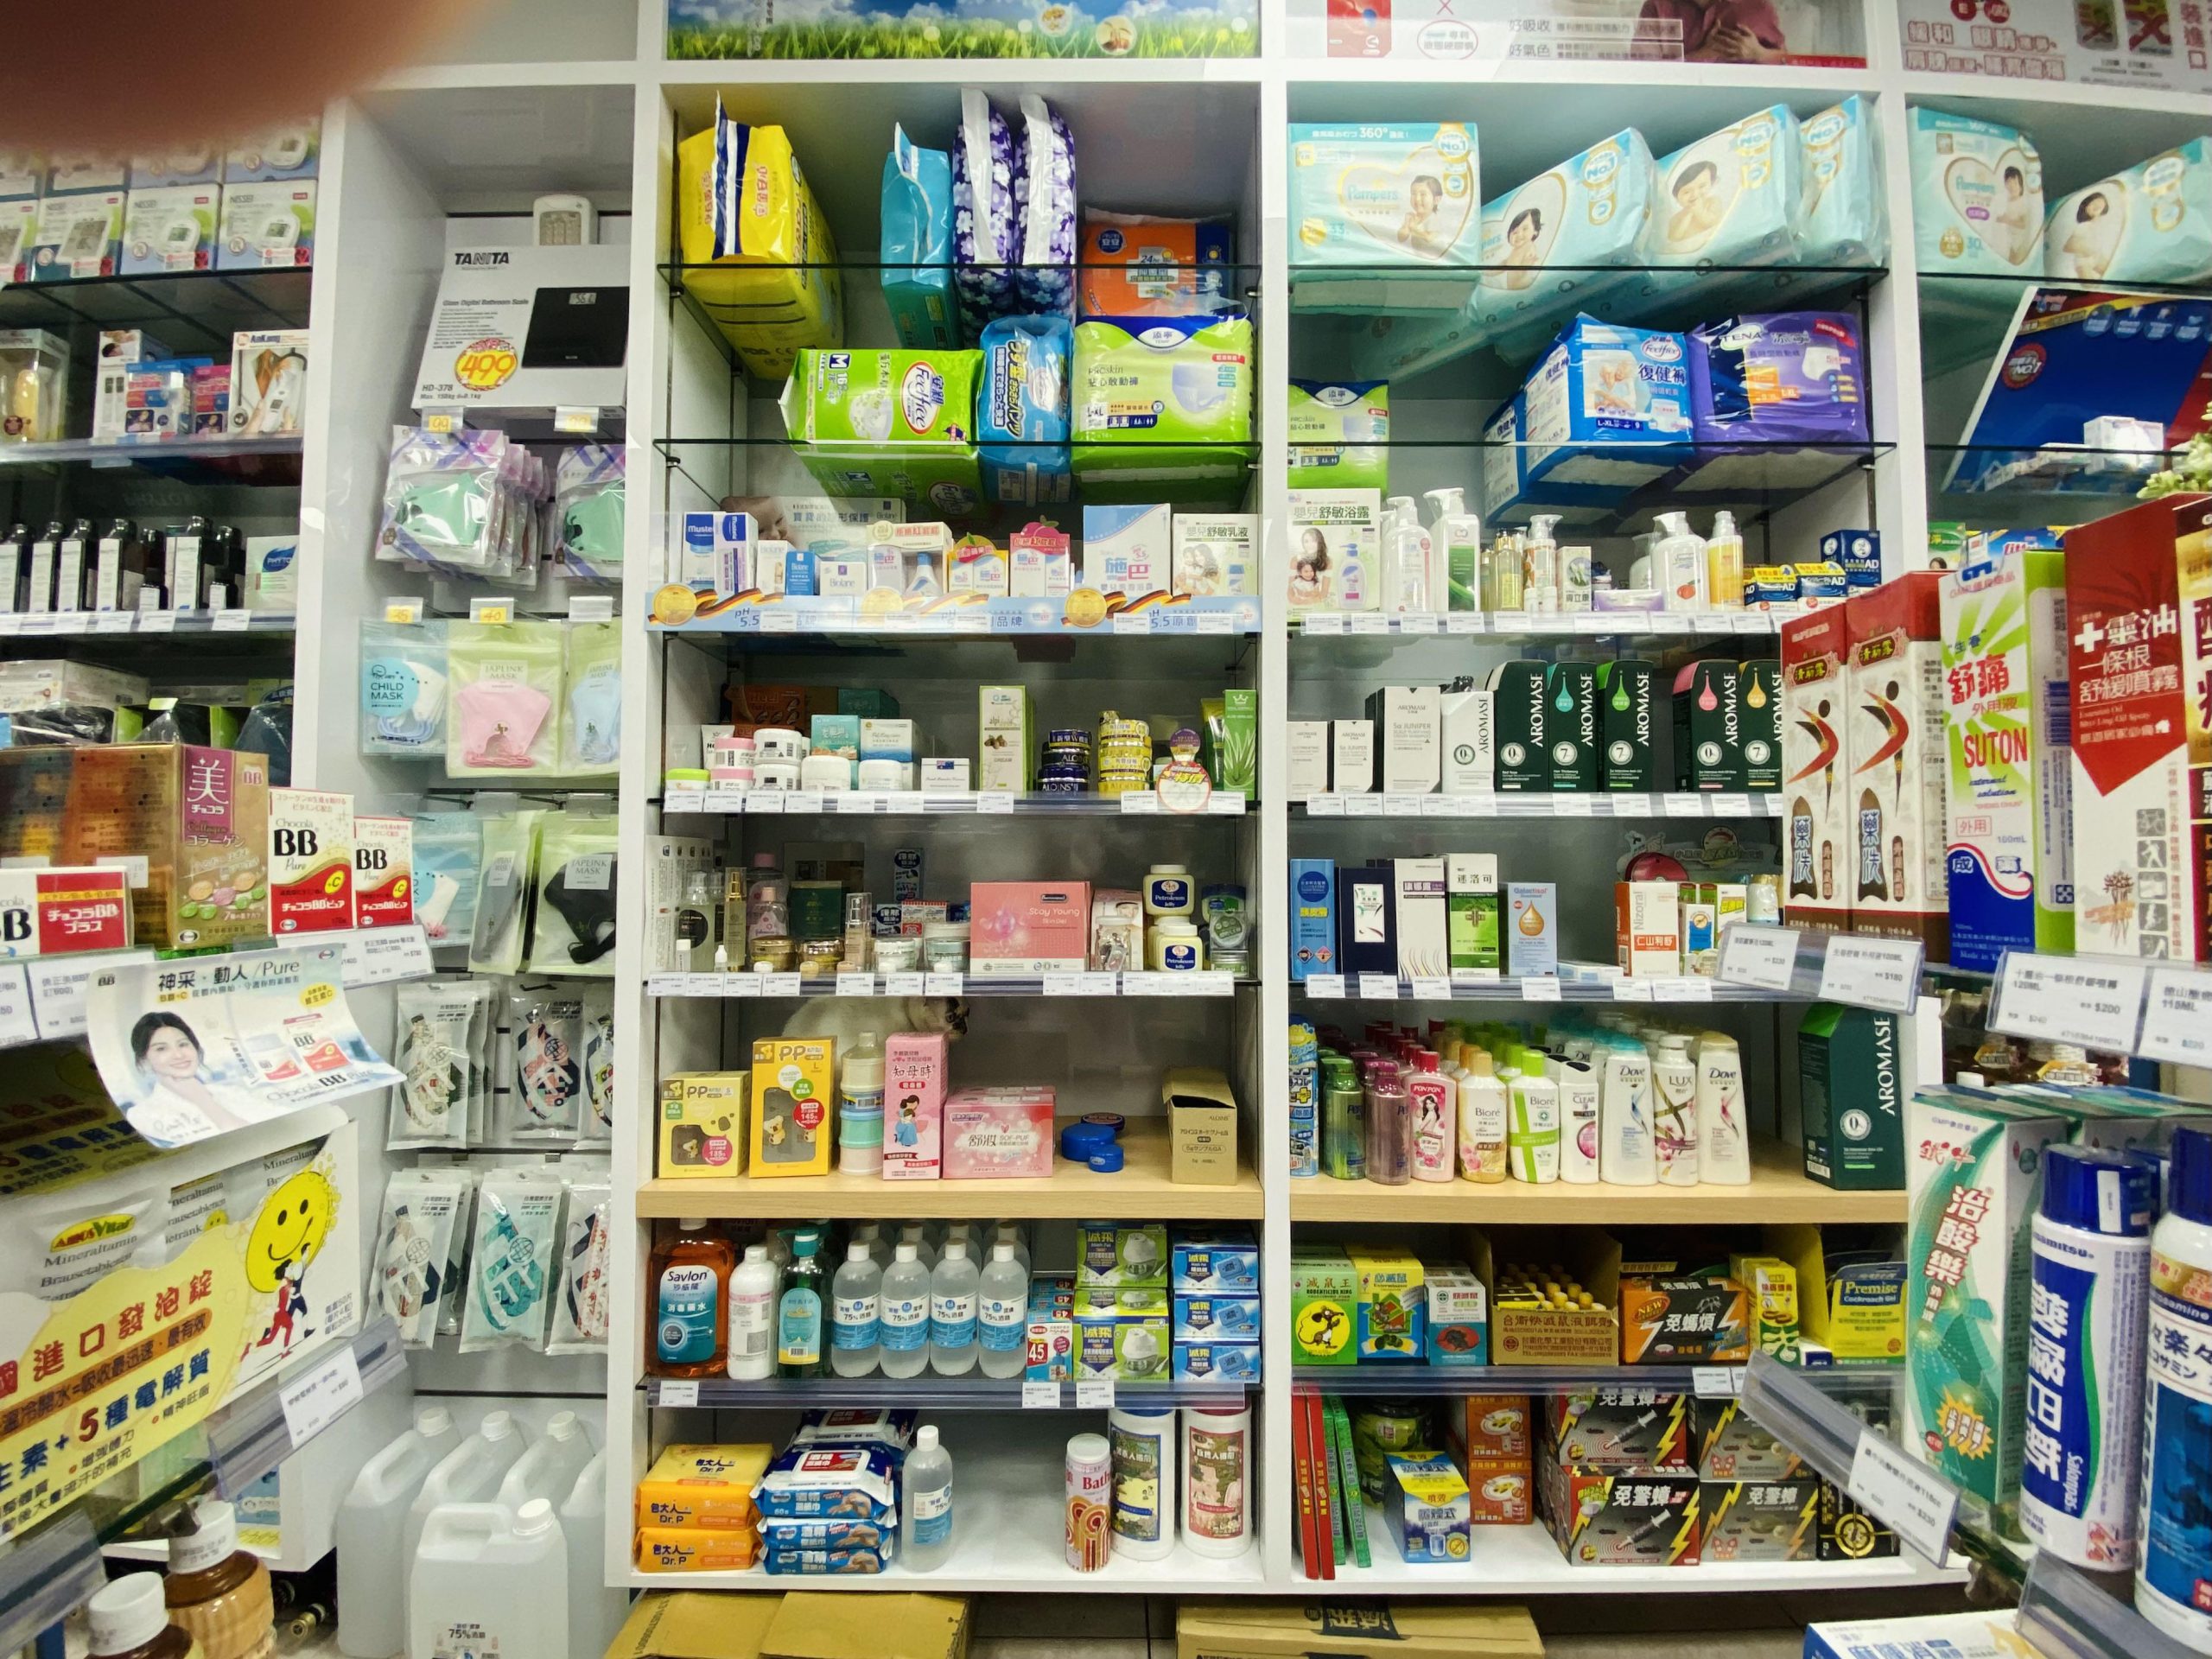 You’ve got 20/20 vision if you can spot the sneaky cat hiding in the busy pharmacy scene in under 20 seconds